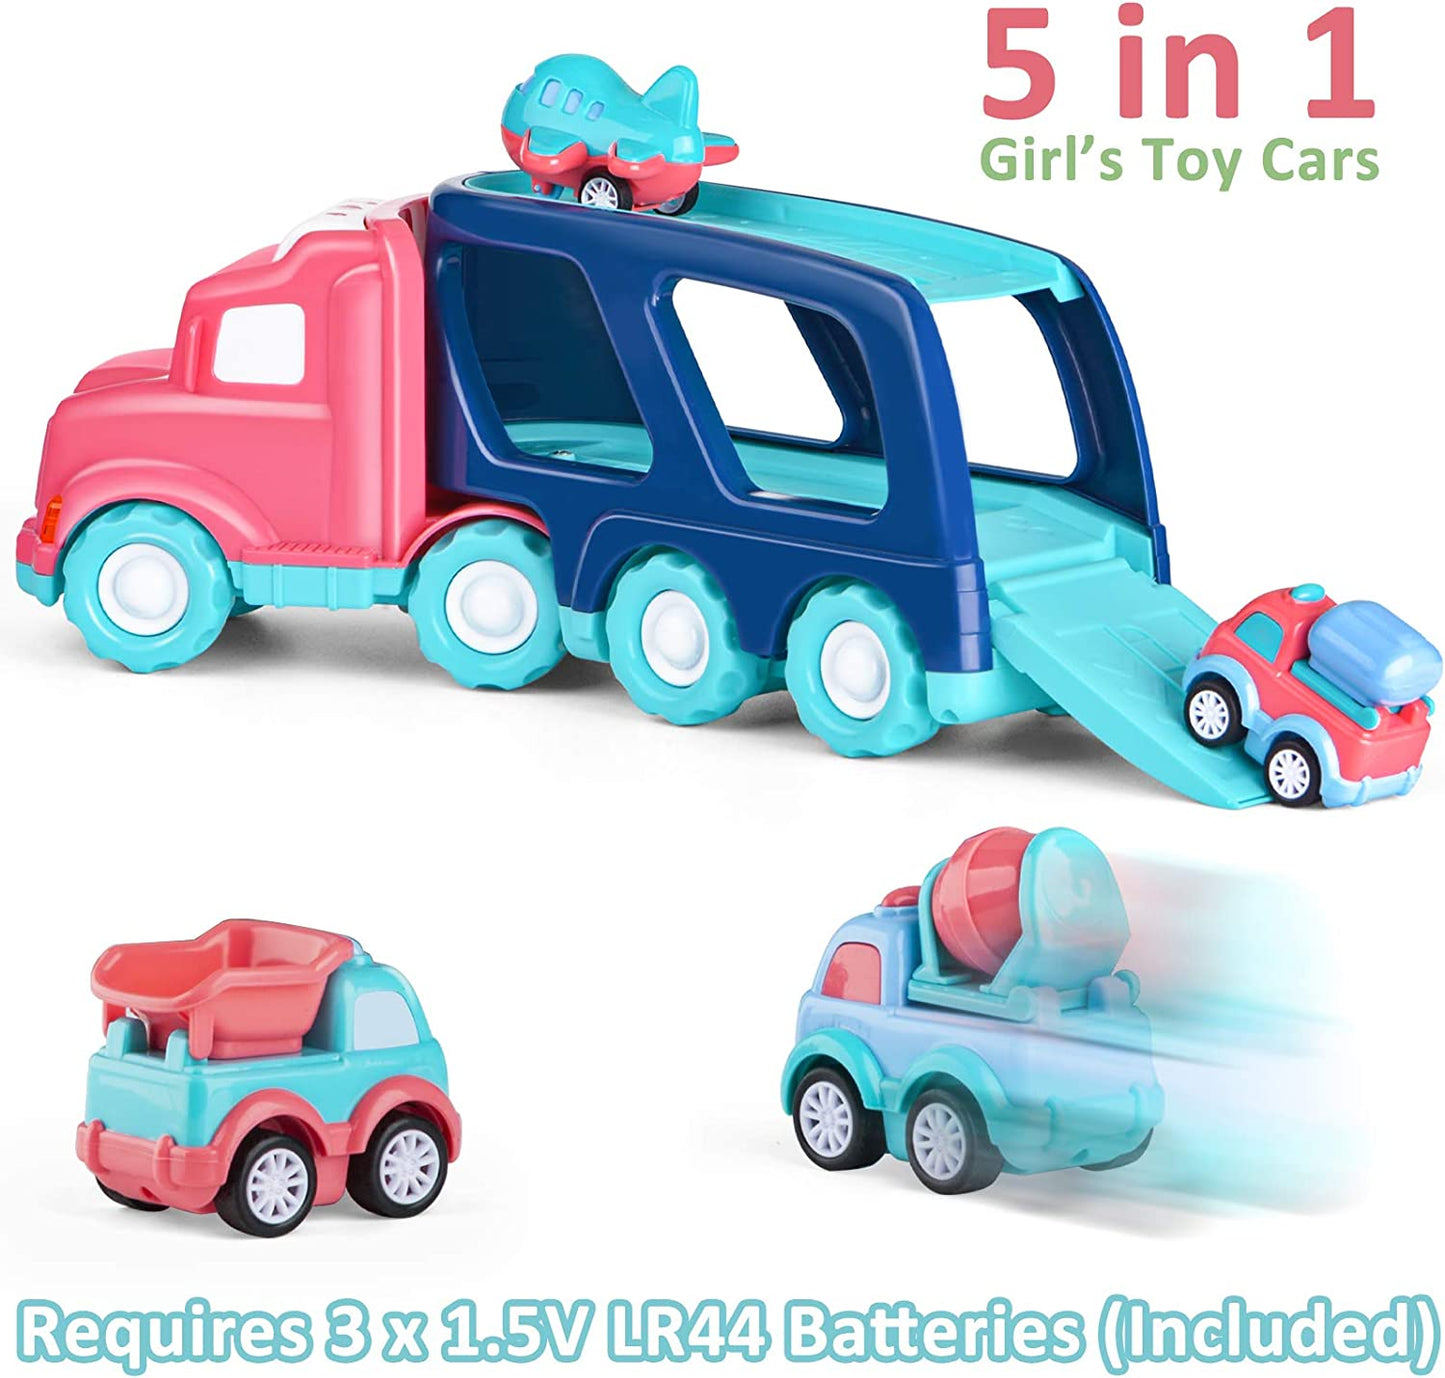 Pink Truck Toy Car for Toddler Girl, 5 in 1 Friction Powered Transport Carrier Truck with Light Sound and 4 Cartoon Pull Back Vehicle Construction Car,Pink Dump Truck Gift Toy for 1 2 3 Year Old Girl